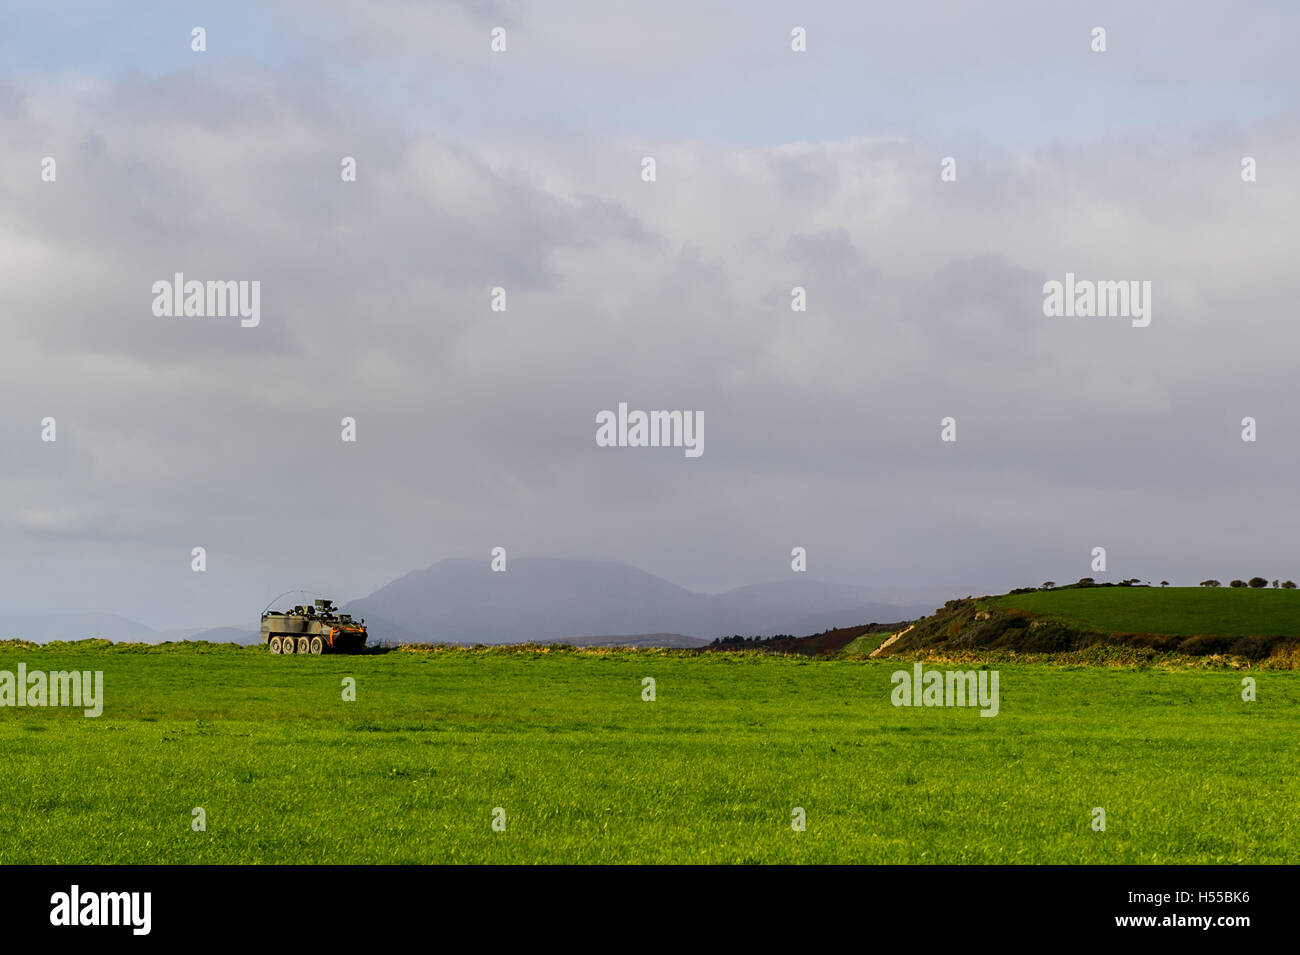 Mowag APC military vehicle of the Irish Army patrols Bantry Airstrip, County Cork, Ireland during an exercise with copy space. Stock Photo